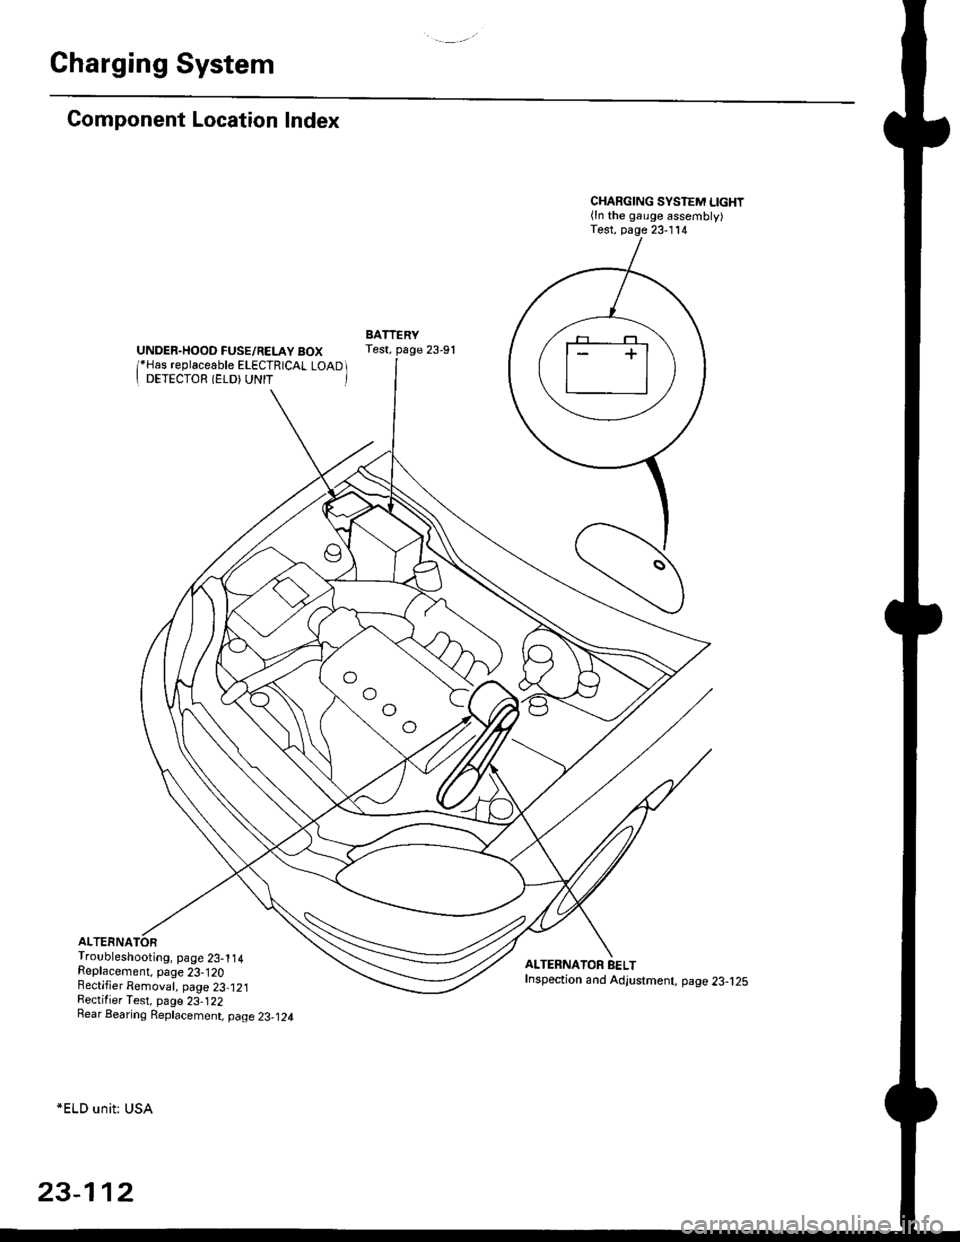 HONDA CIVIC 1999 6.G User Guide Charging System
Component Location Index
UNDER.HOOD FUSE/RELAY BOX/*Has replaceable ELECTRICAL LOAD II DETECTOR (ELD) UNIT 
Troubleshooting, page 23-1 14Replacement, page 23-120Bectifier Removal, pag